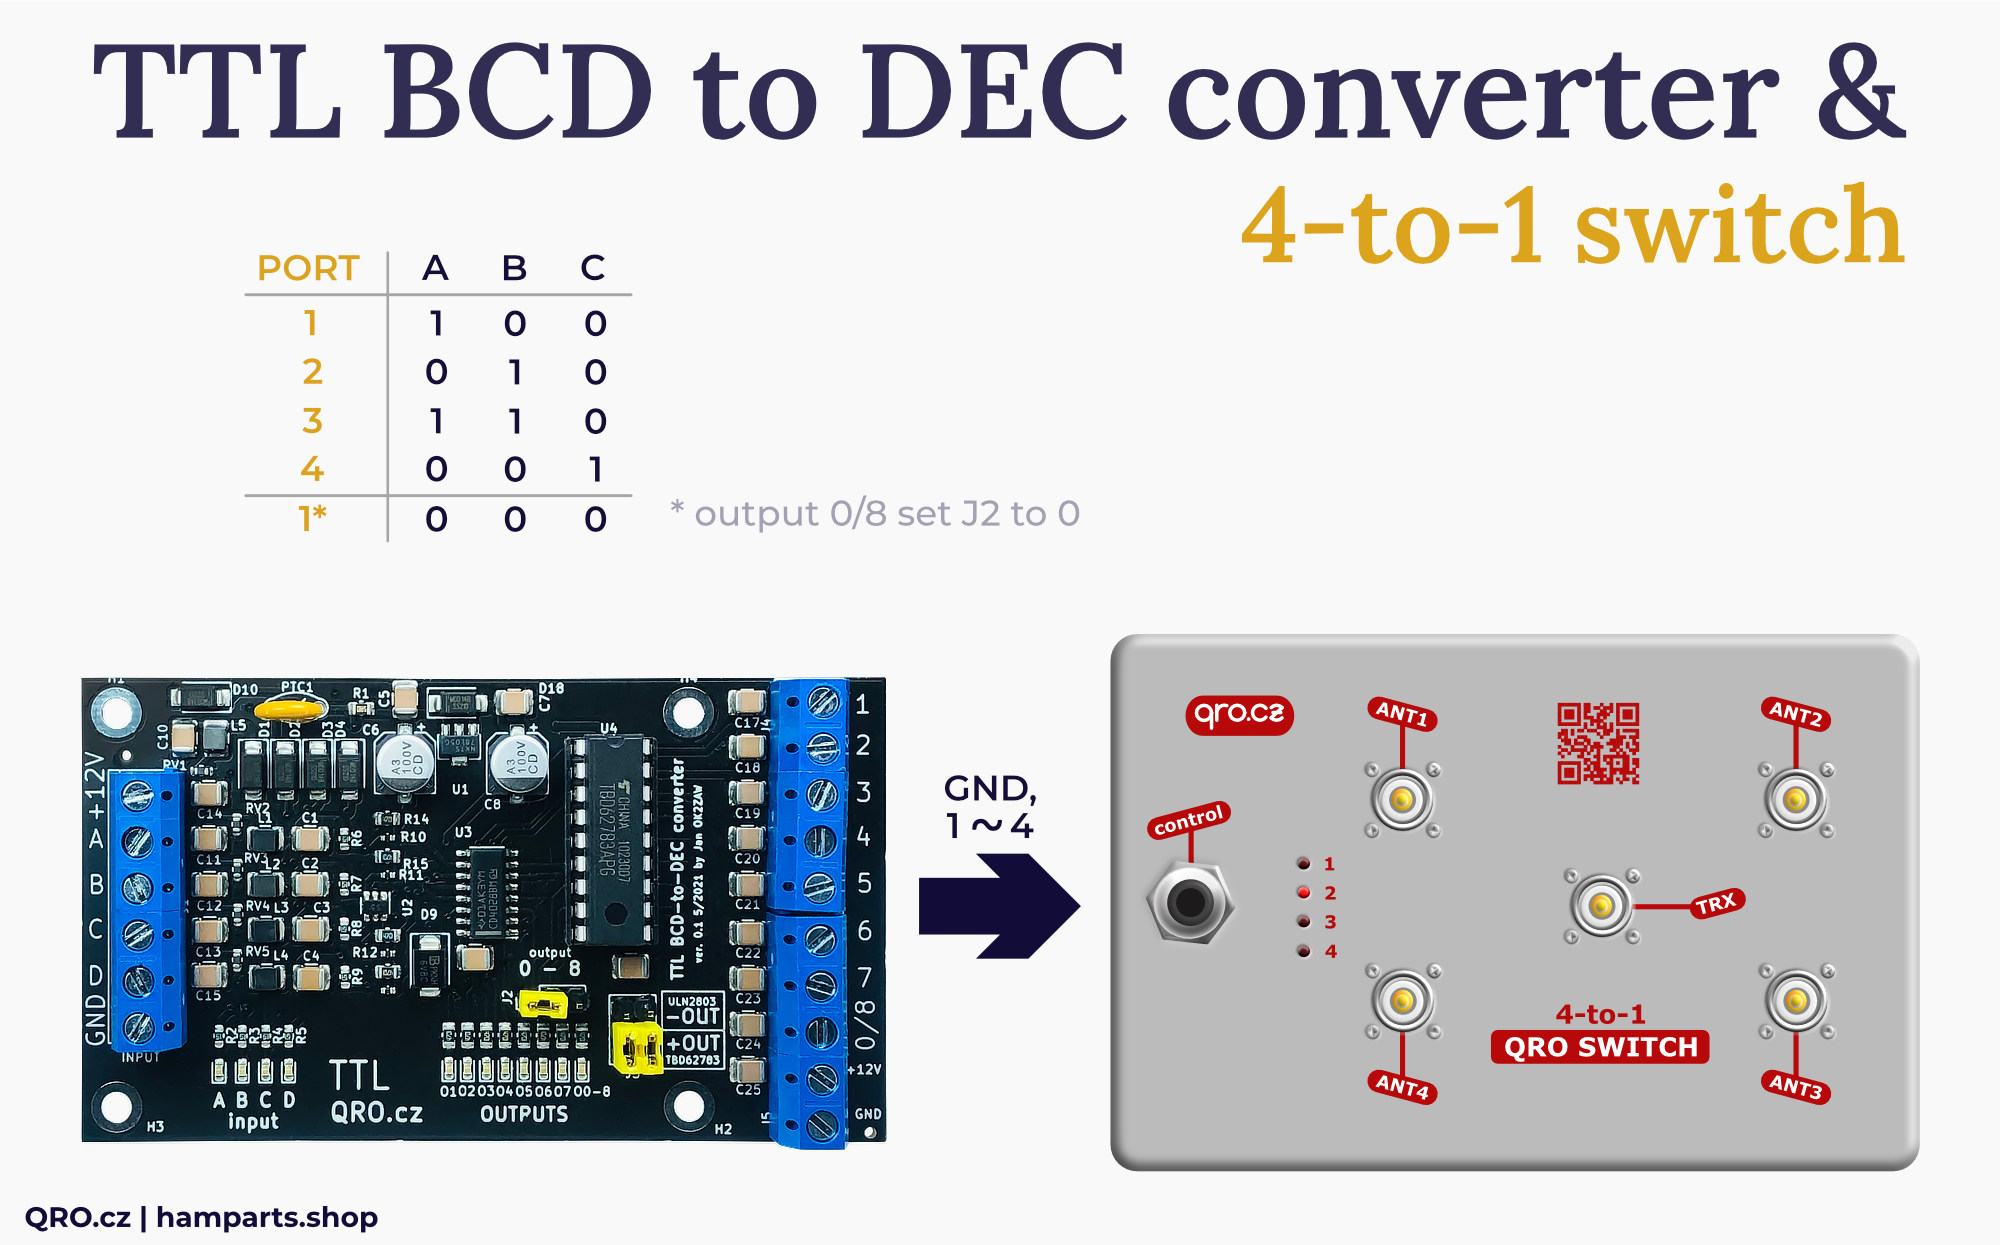 BCD to DEC TTL version converter with 4 to 1 antenna switch by qro.cz hamparts.shop